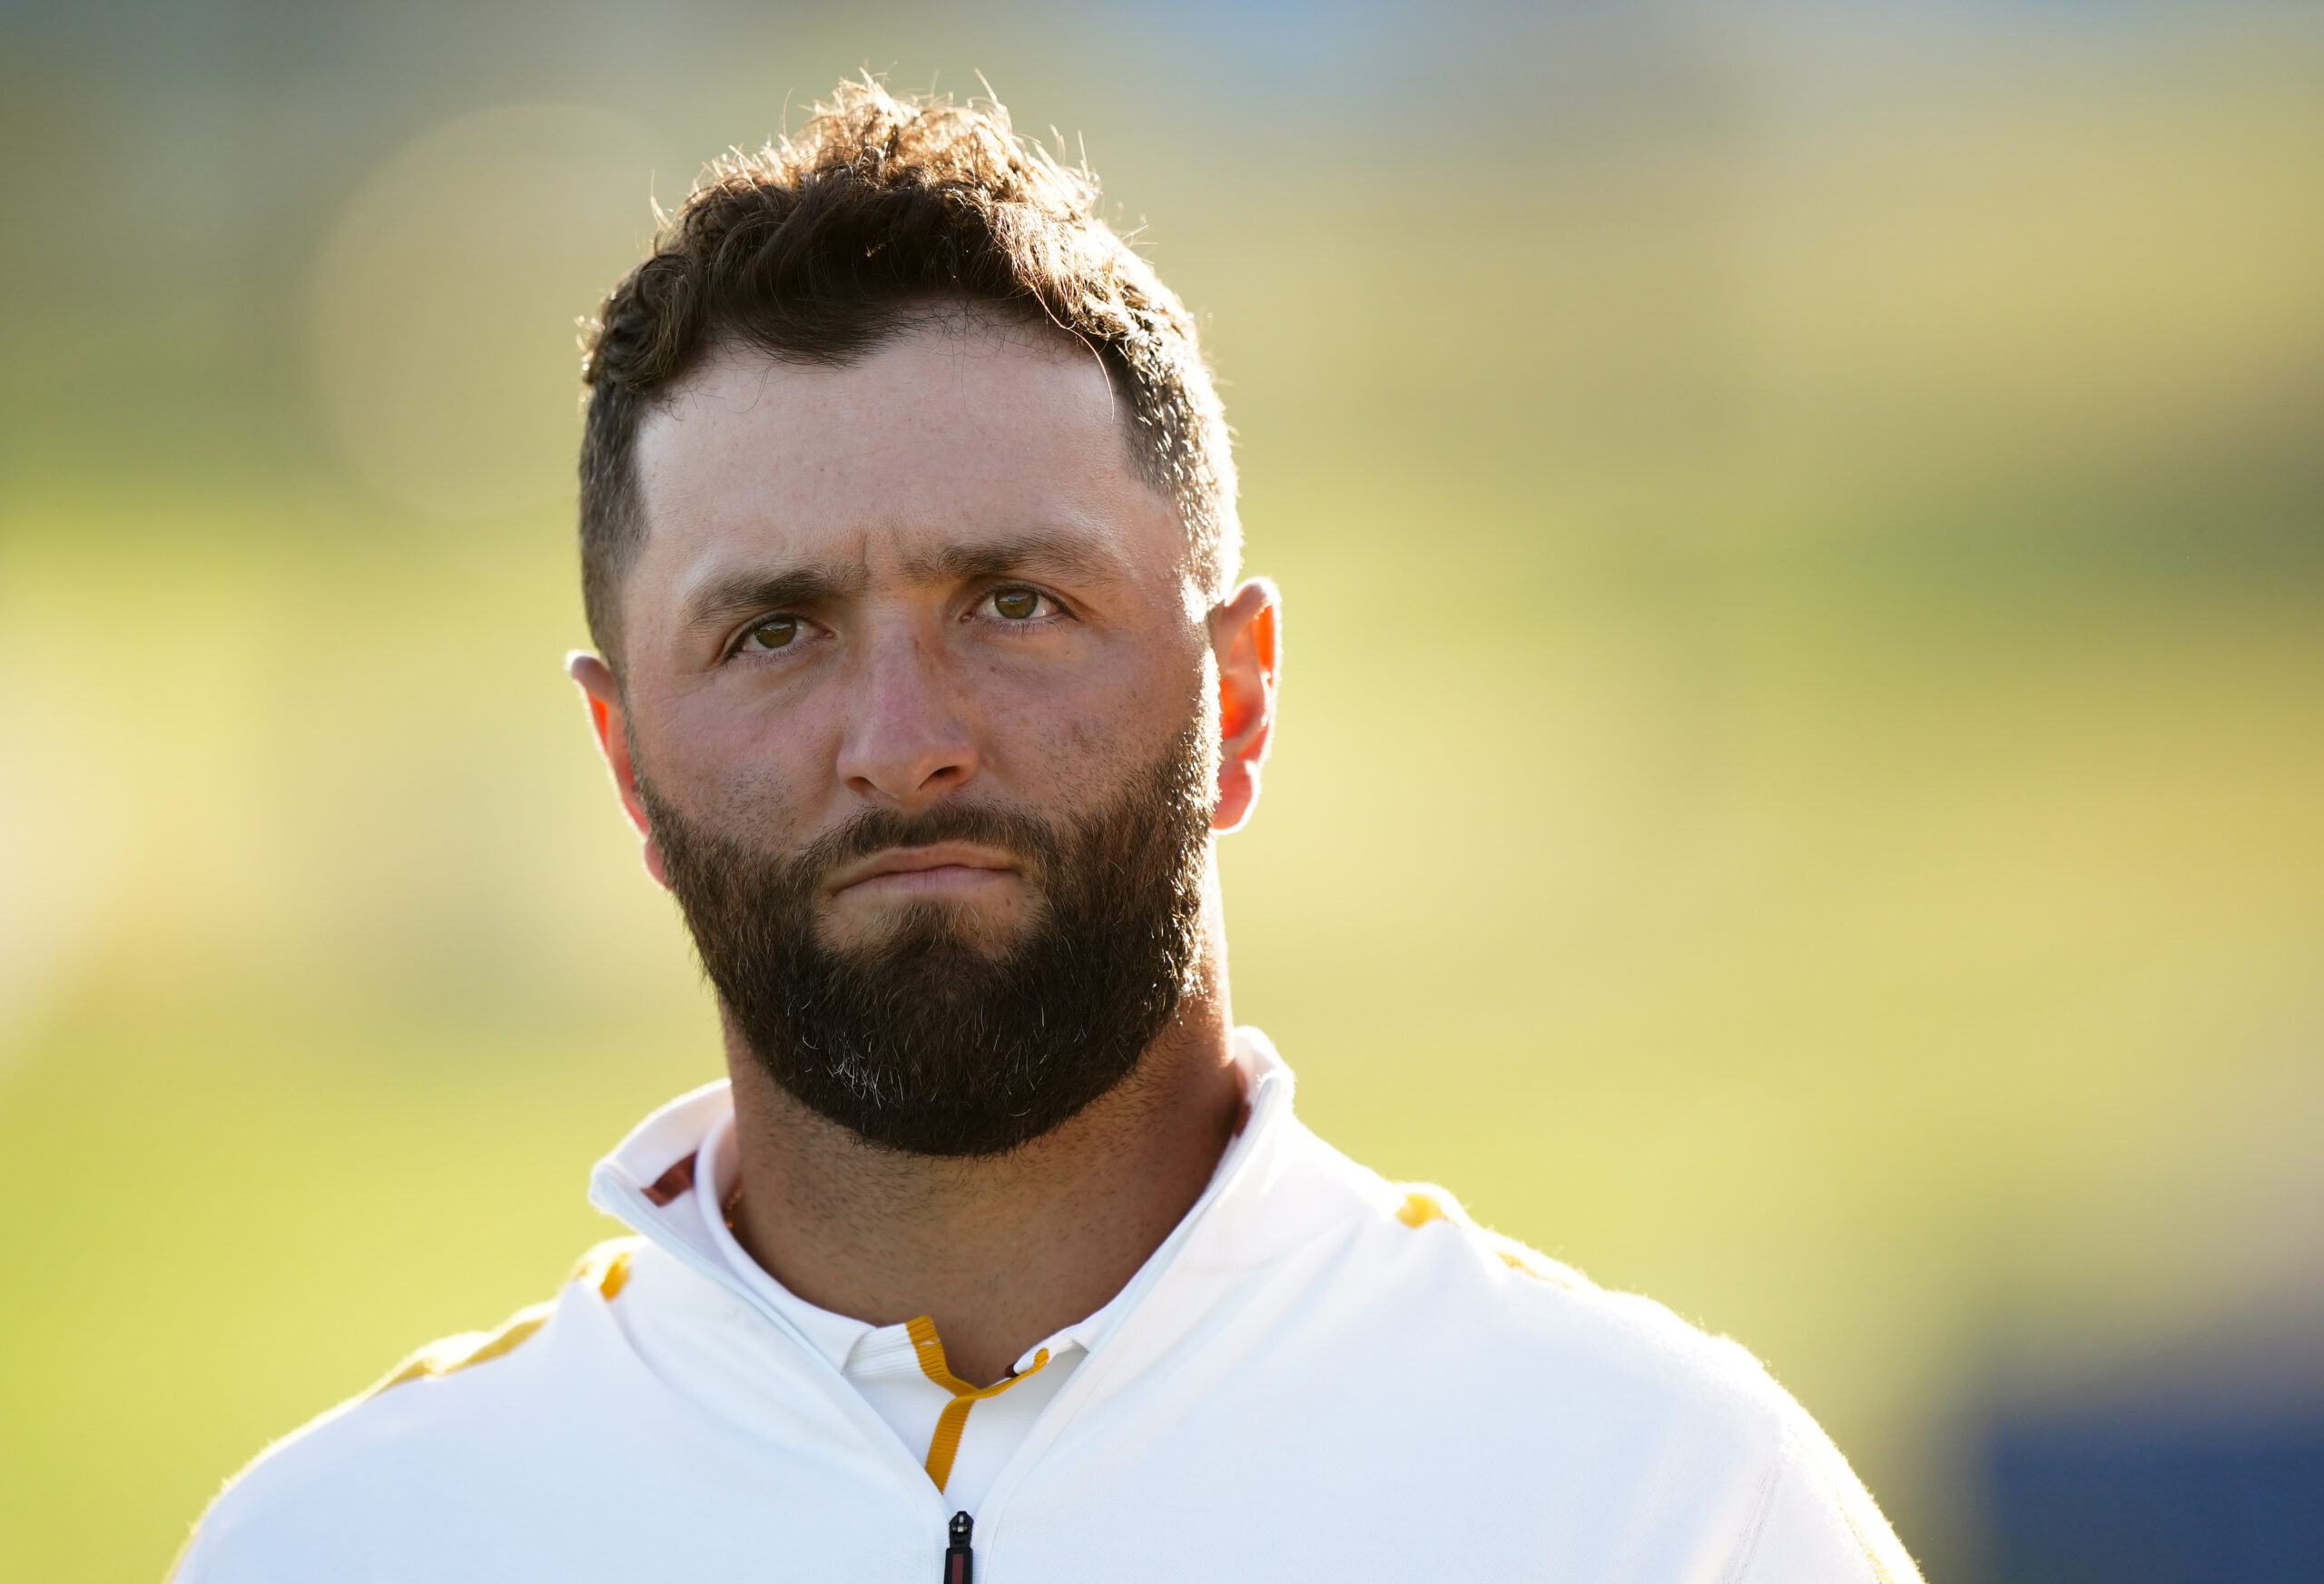 Jon Rahm might not compete in US Open